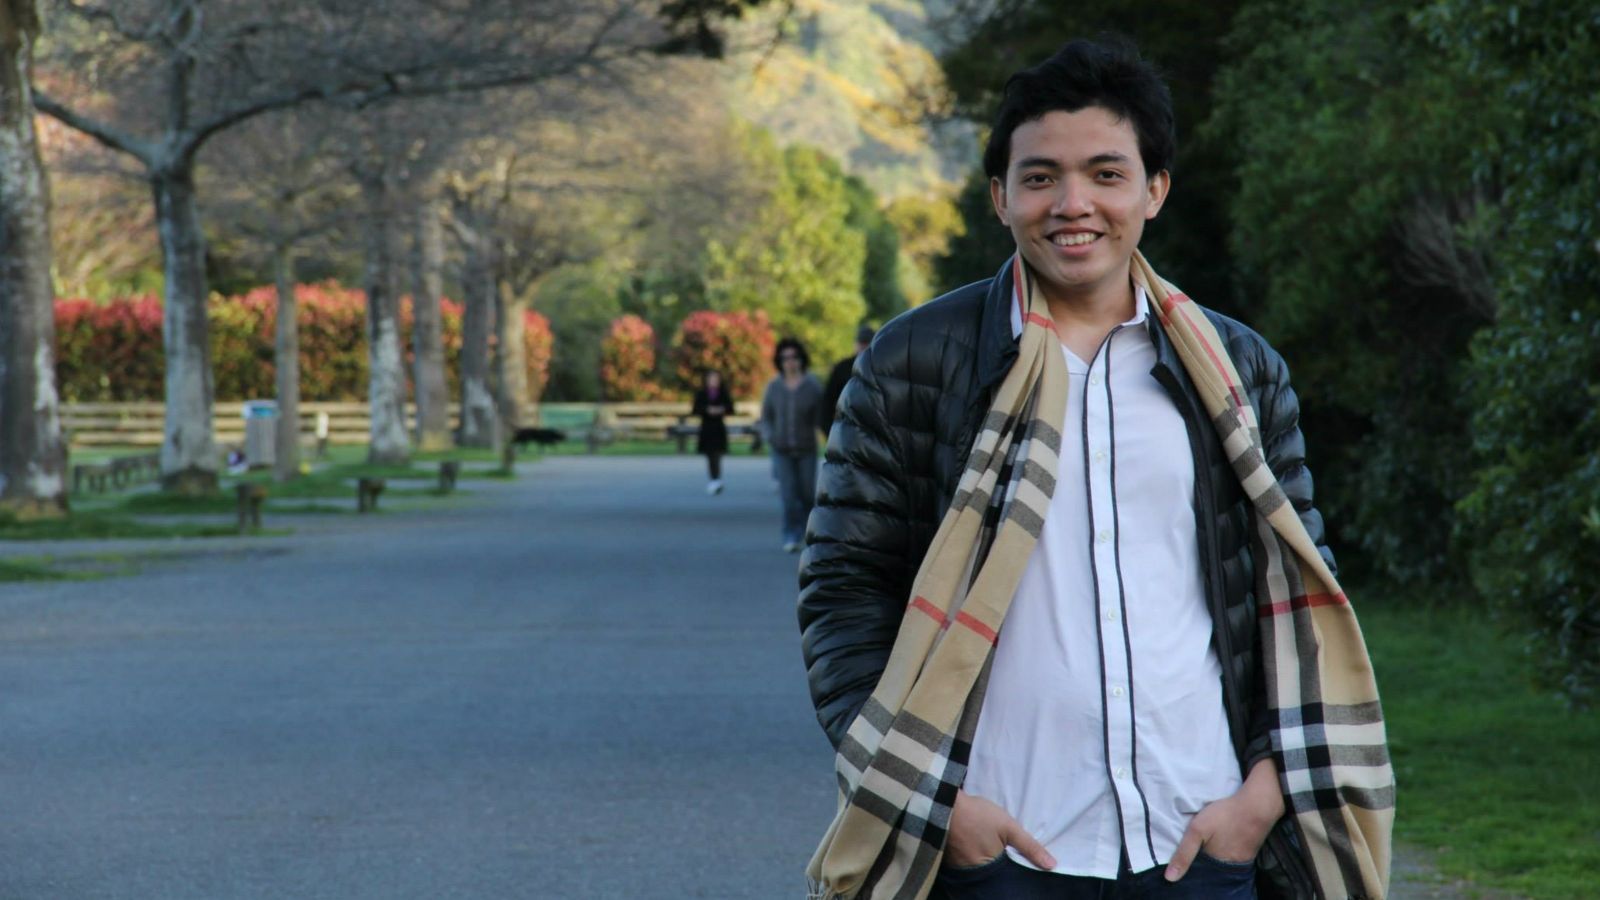 Wearing a white shirt, black jacket, and plaid scarf, Tran The Trung stands with his hands in his pockets on a park pathway shaded by autumnal coloured trees.